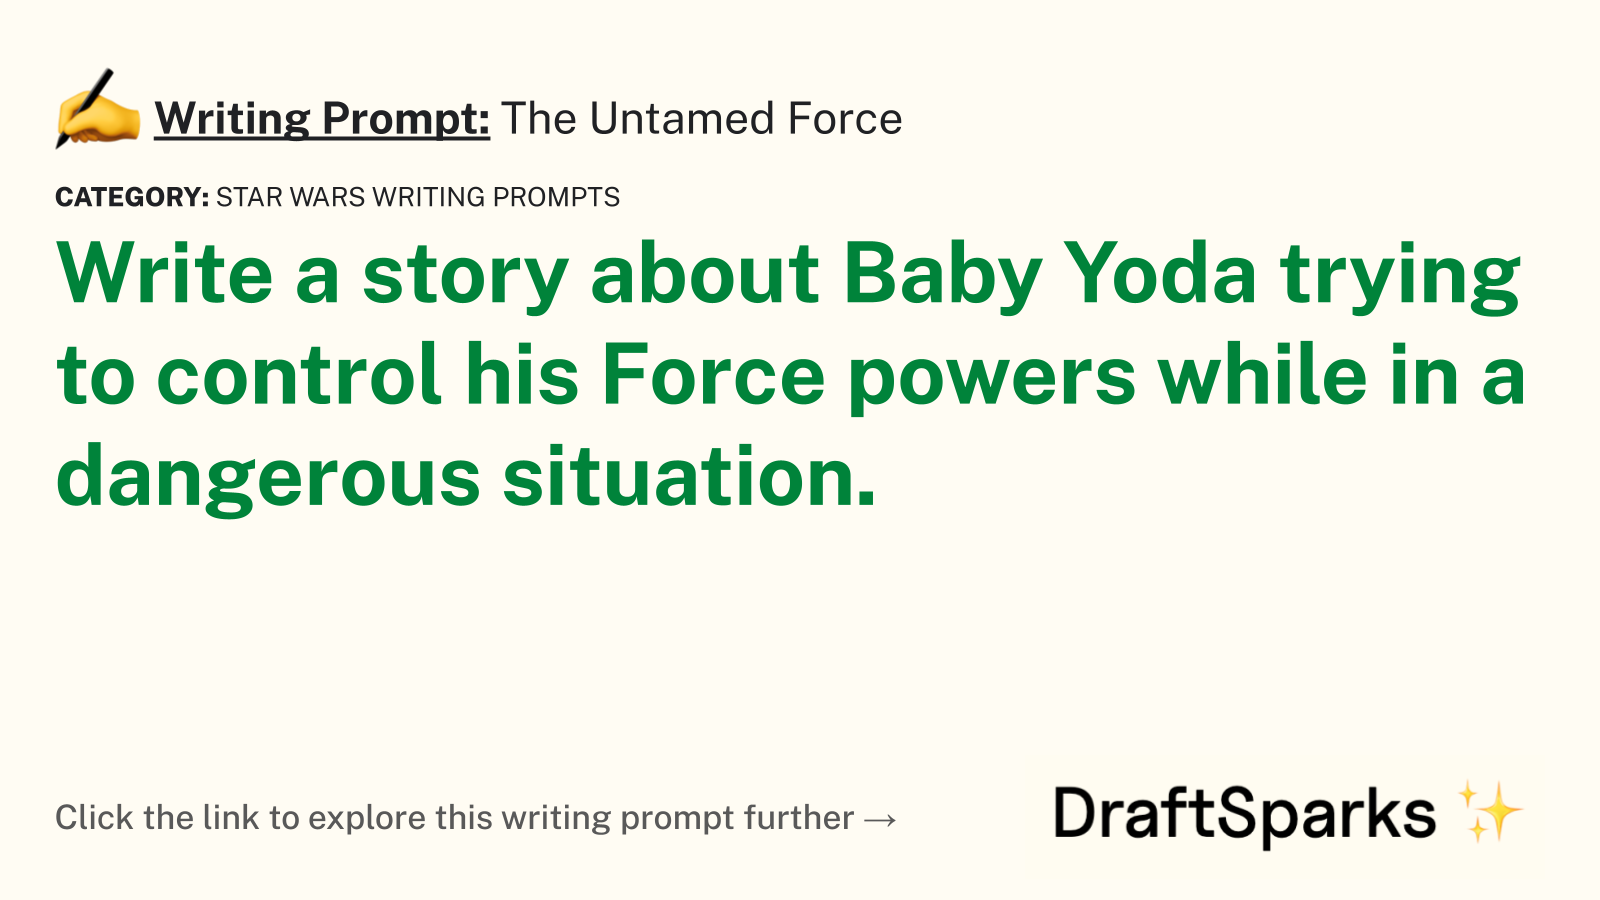 The Untamed Force